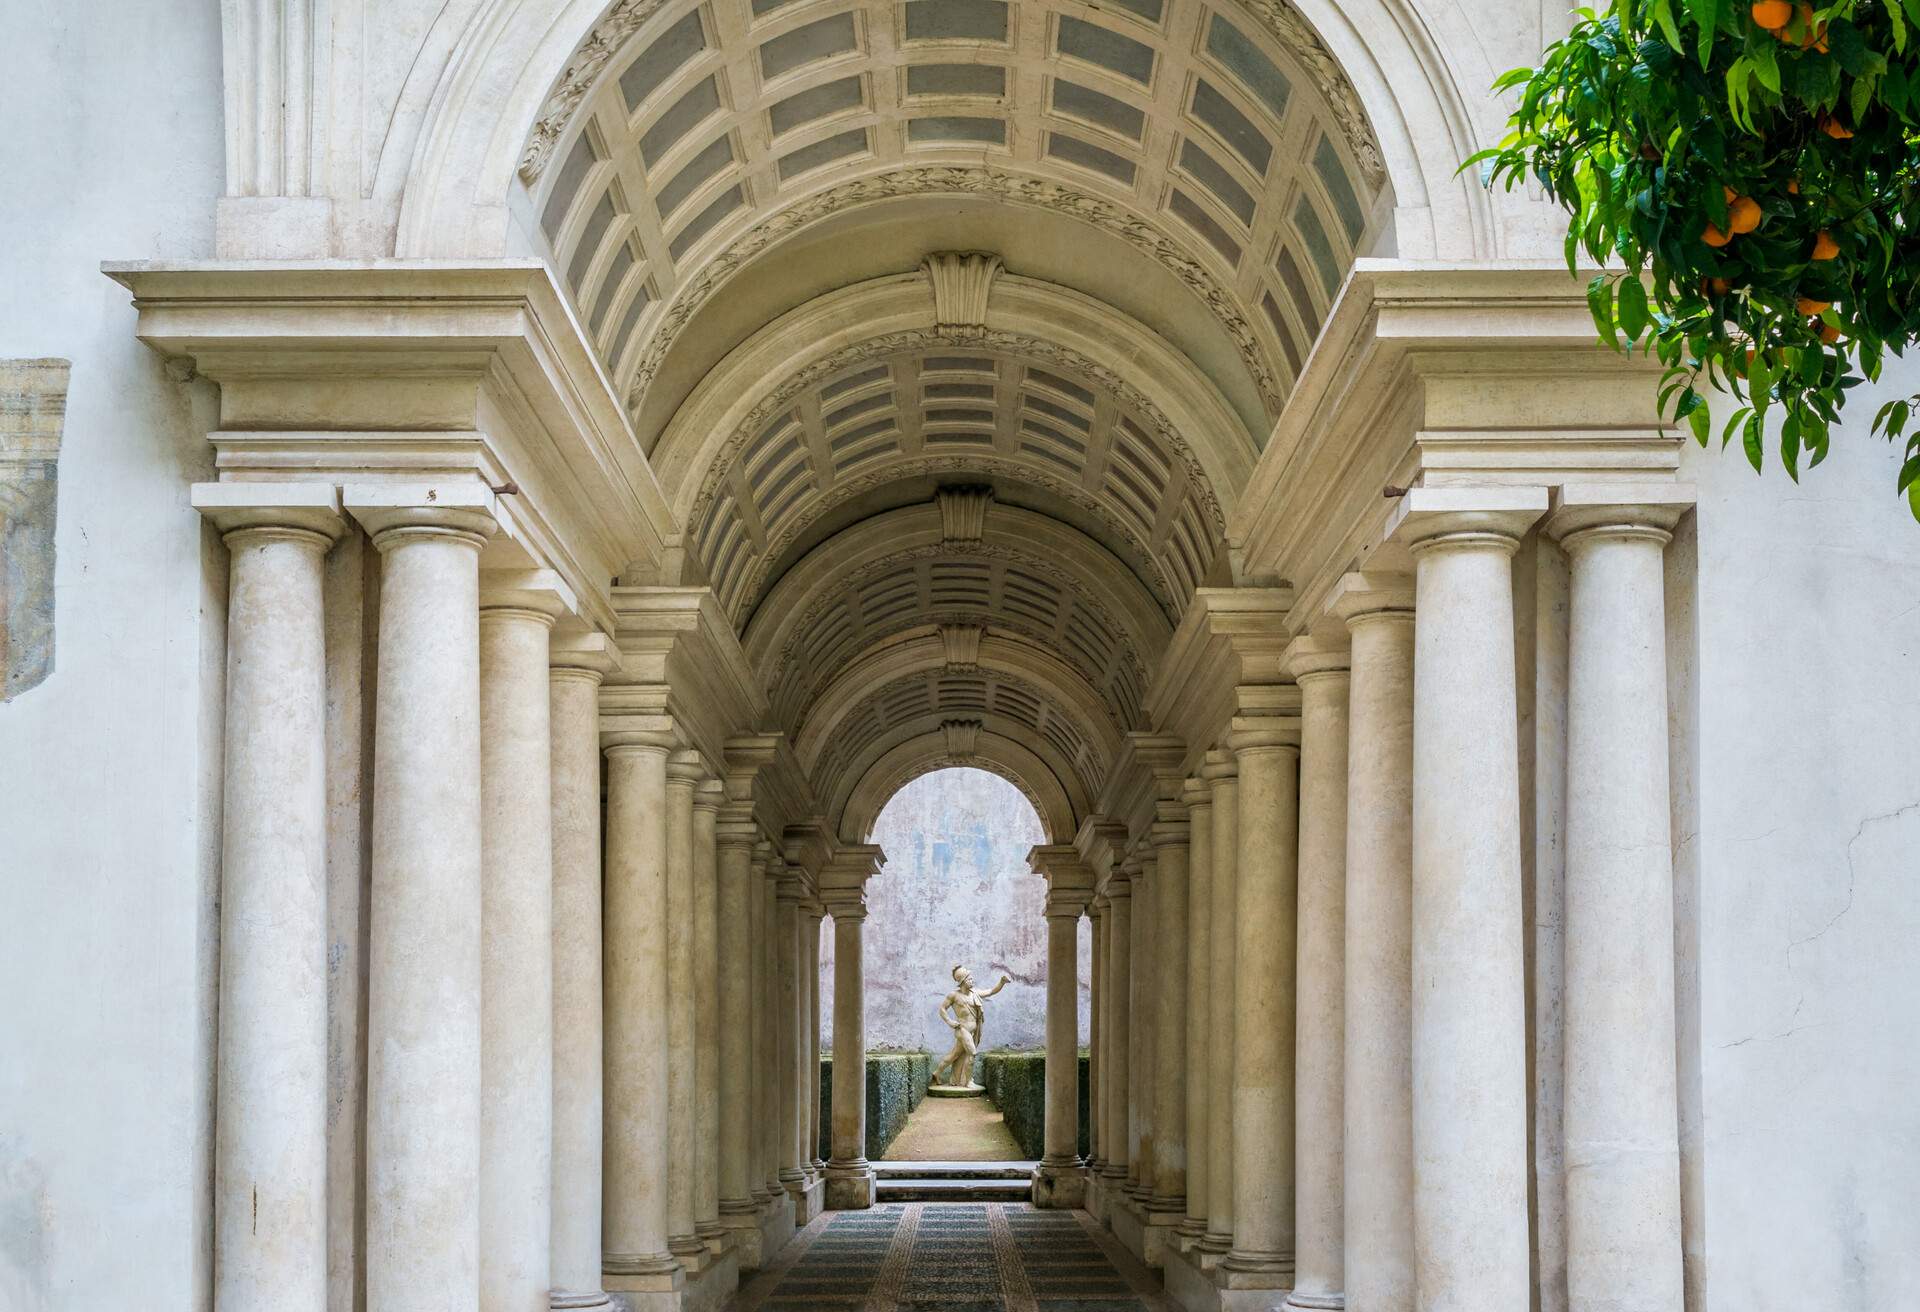 The forced perspective gallery by Francesco Borromini in Palazzo Spada, in Rome, Italy.